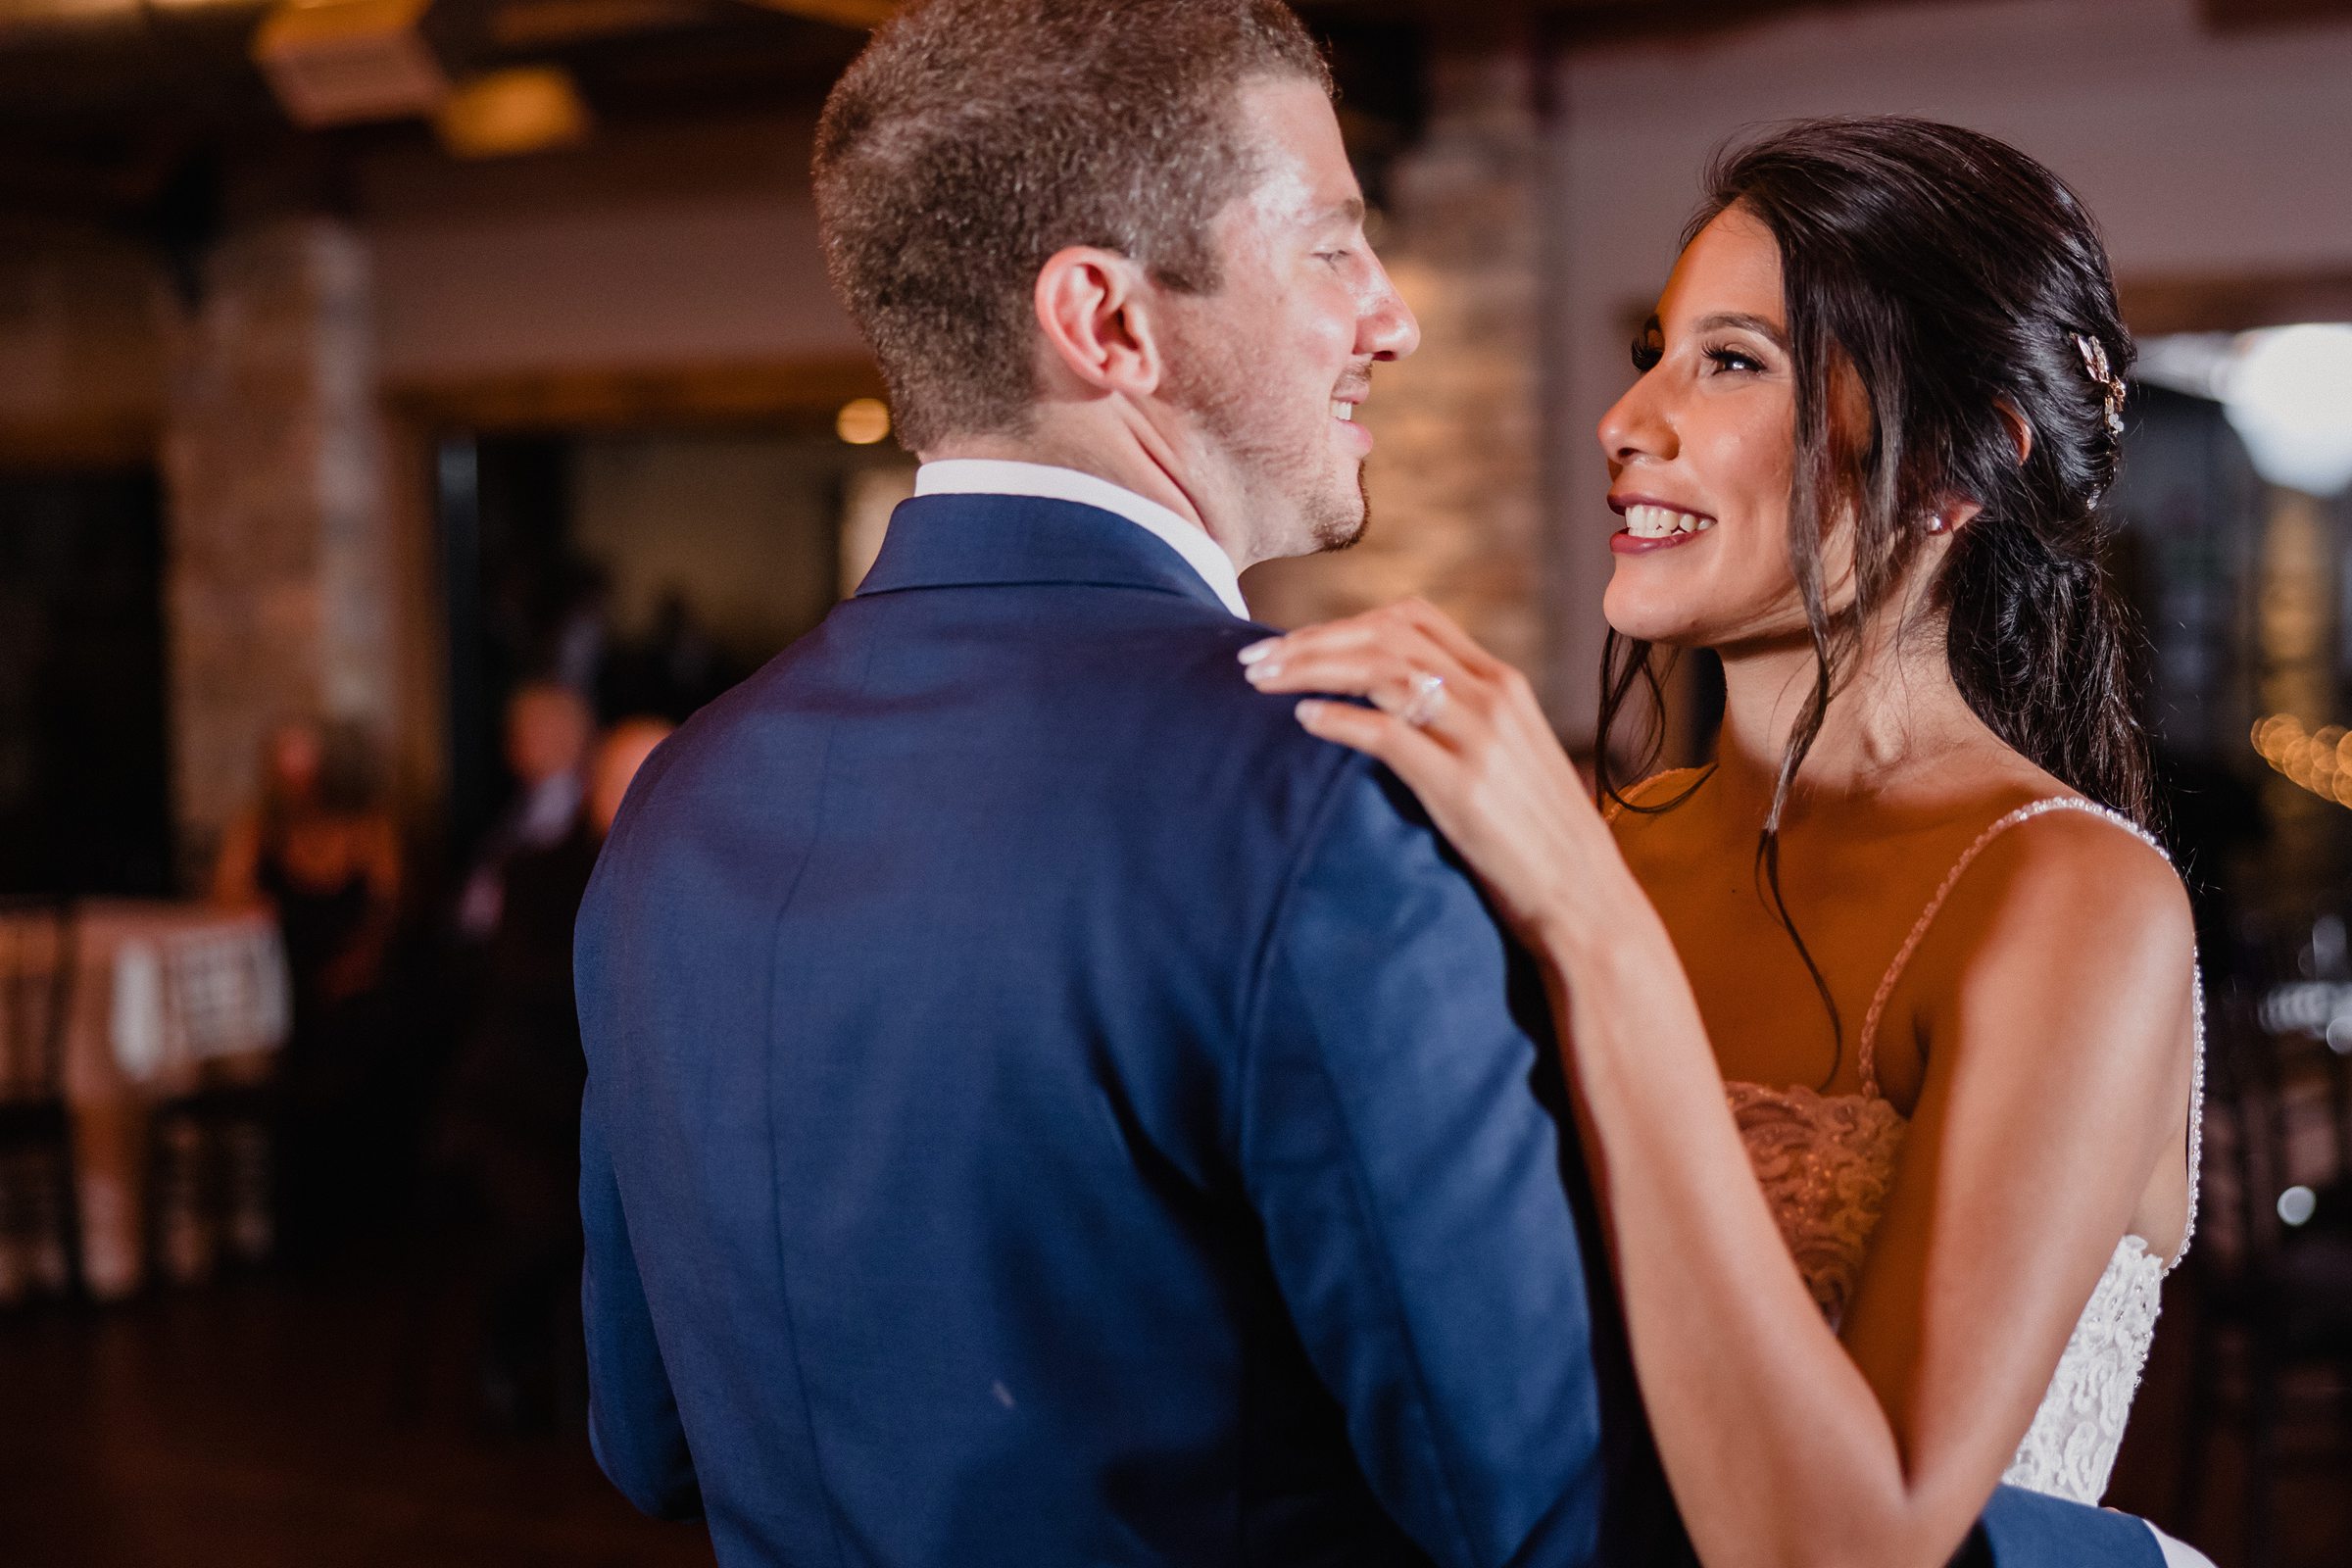 Bride and groom share their first dance during their wedding at the Fisherman's Inn in Elburn, Illinois.